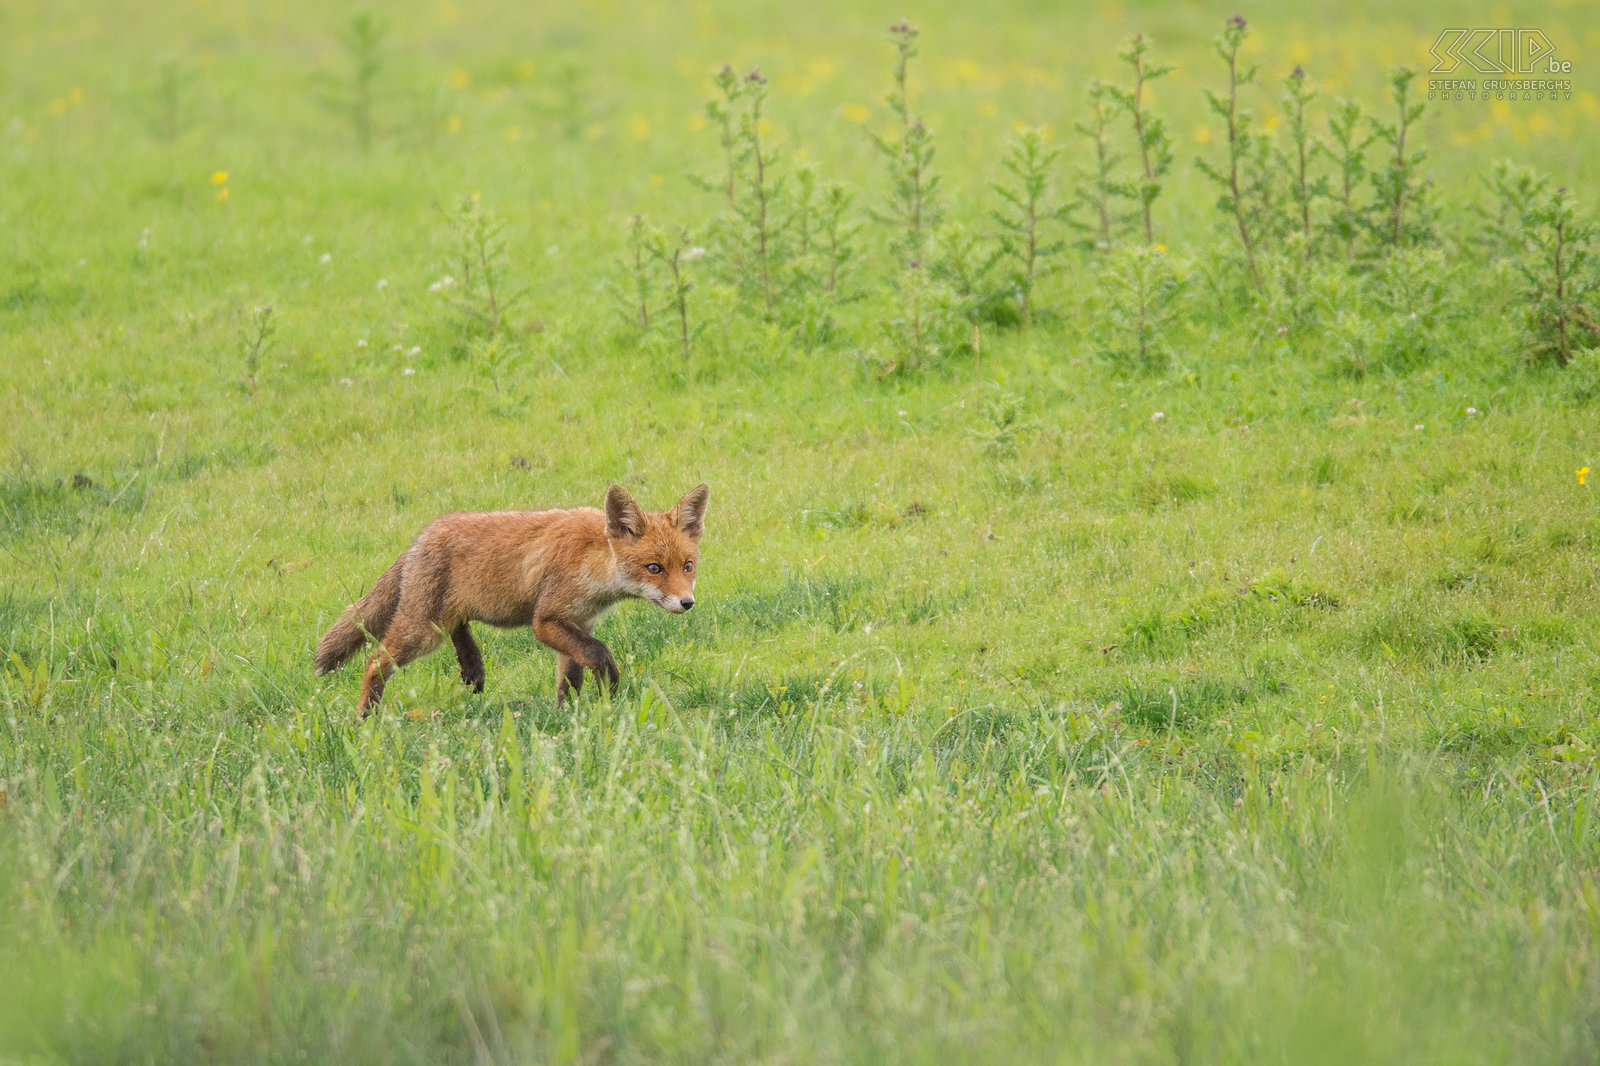 Oostvaardersplassen - Juvenile fox The Oostvaardersplassen in Flevoland is the largest national park in the Netherlands. It is a large wetland with reed plains, rough grassland and ponds that attracts thousands of birds such as geese, spoonbills, cormorants, herons, .... 25 years ago they introduced some deer, Heck cattle and Konik horses and this park is a very good example of rewilding. Now there live about 1100 wild horses, almost 3300 red deer, 40 Heck cattle, around 50 roe deer and a healthy population of red foxes that are also active at daytime. Only a small part of the park has open access but now and than they organize safaris. During our safari we encountered a cute juvenile fox (Vulpes vulpes) that come to took a look at an old carcass of a deer.<br />
 Stefan Cruysberghs